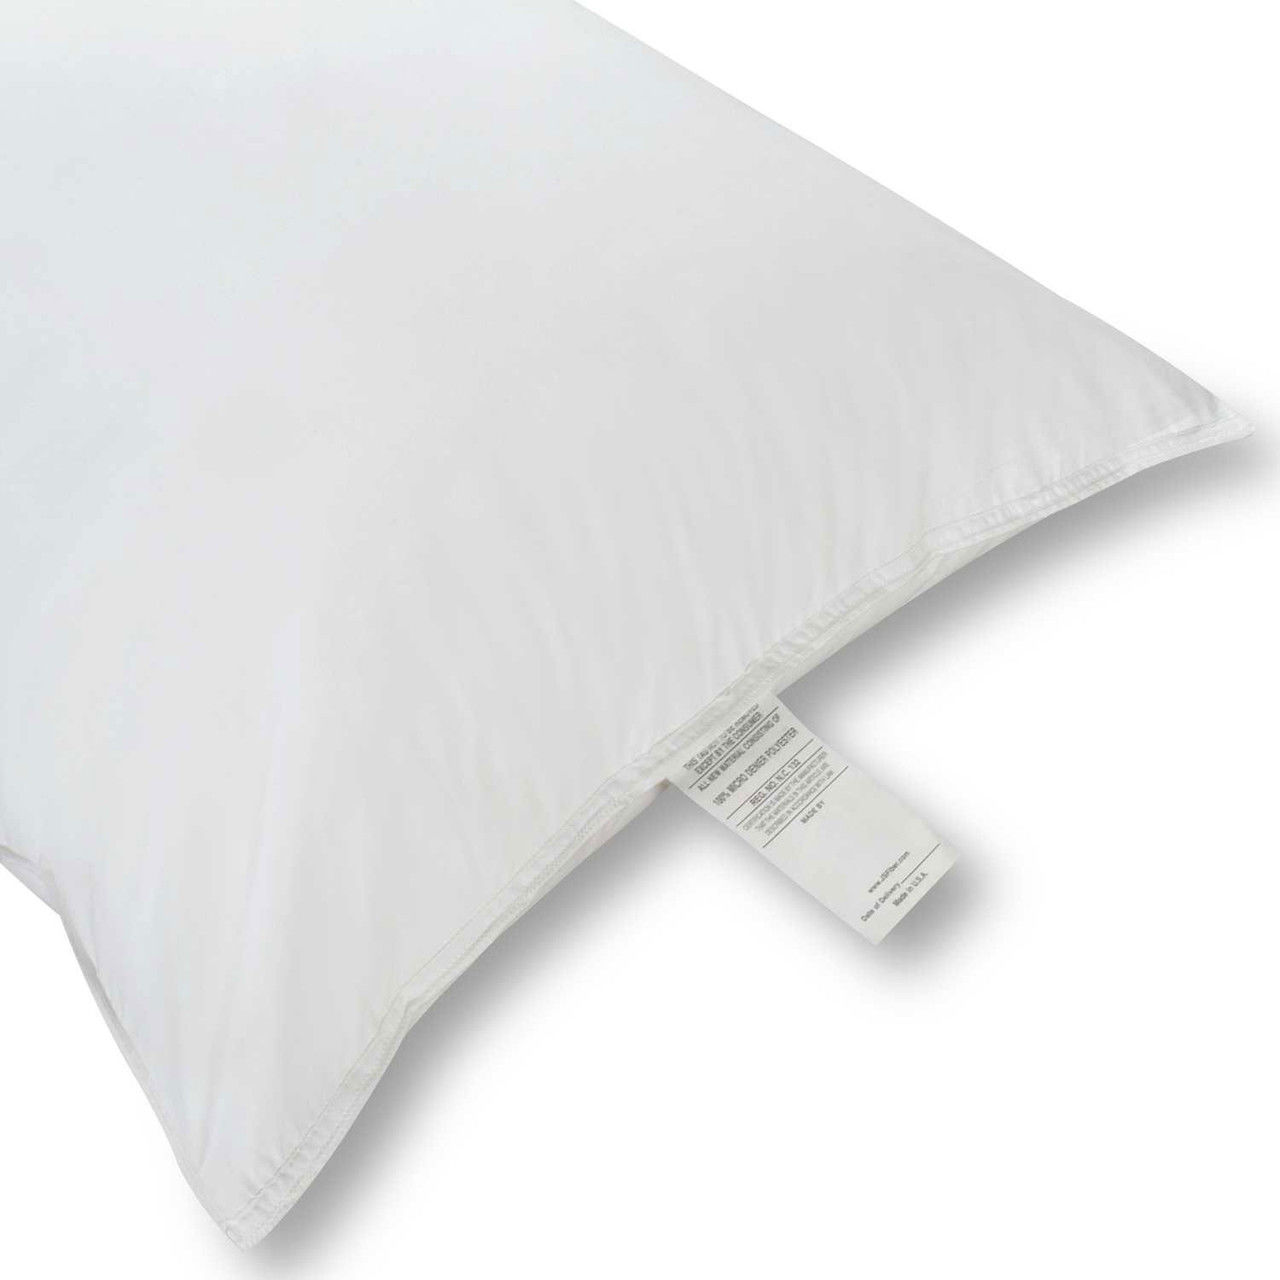 What is the Micro Denier Hotel Collection Pillow made of?